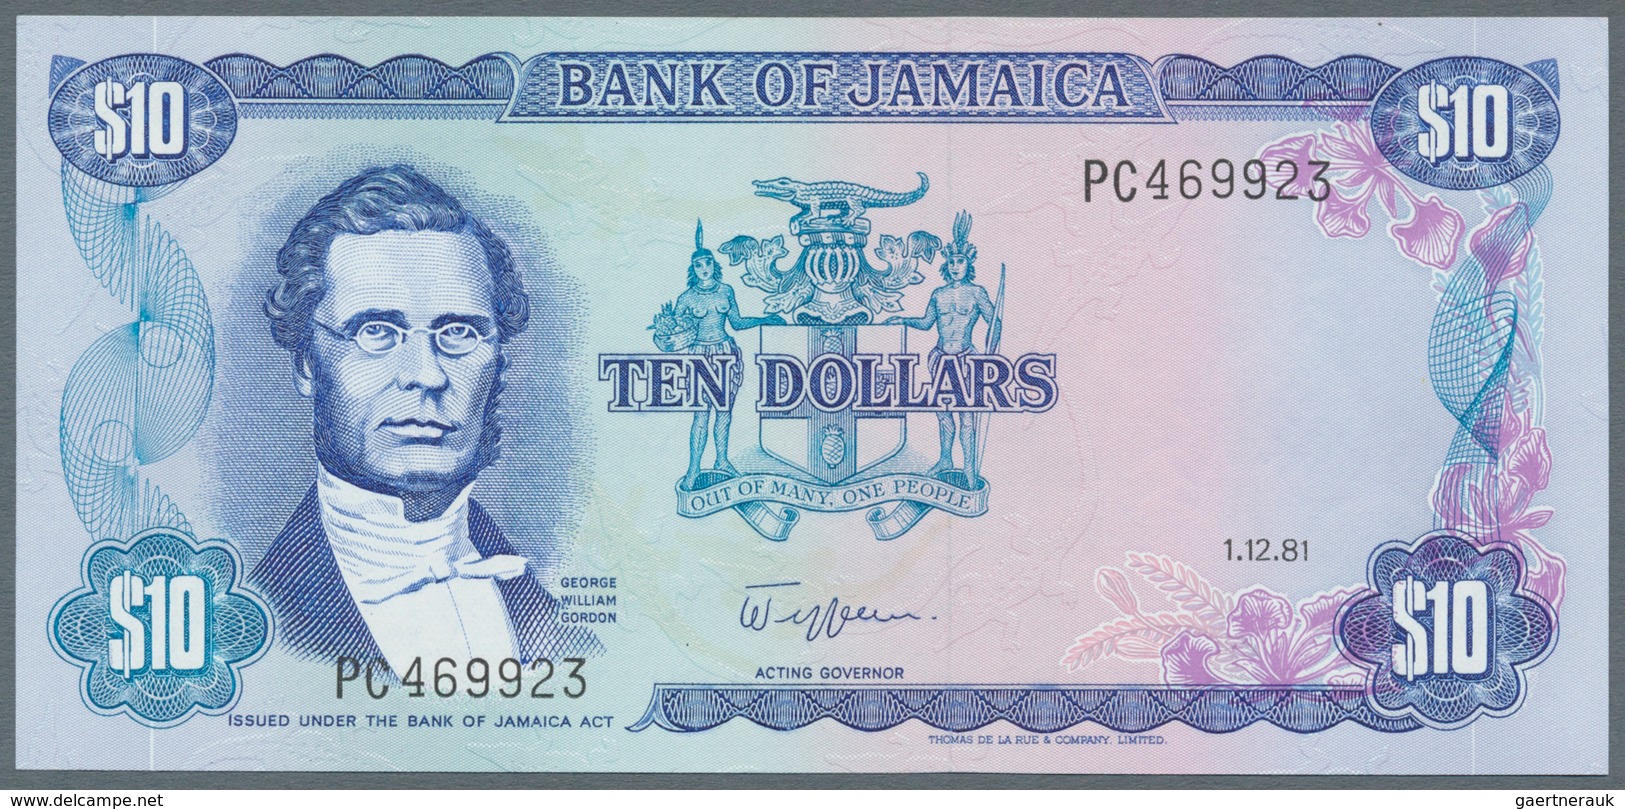 Jamaica: Lot with 38 banknotes Jamaica 1 - 500 Dollars ND(1970's) - 1999 in F- to UNC condition. (38